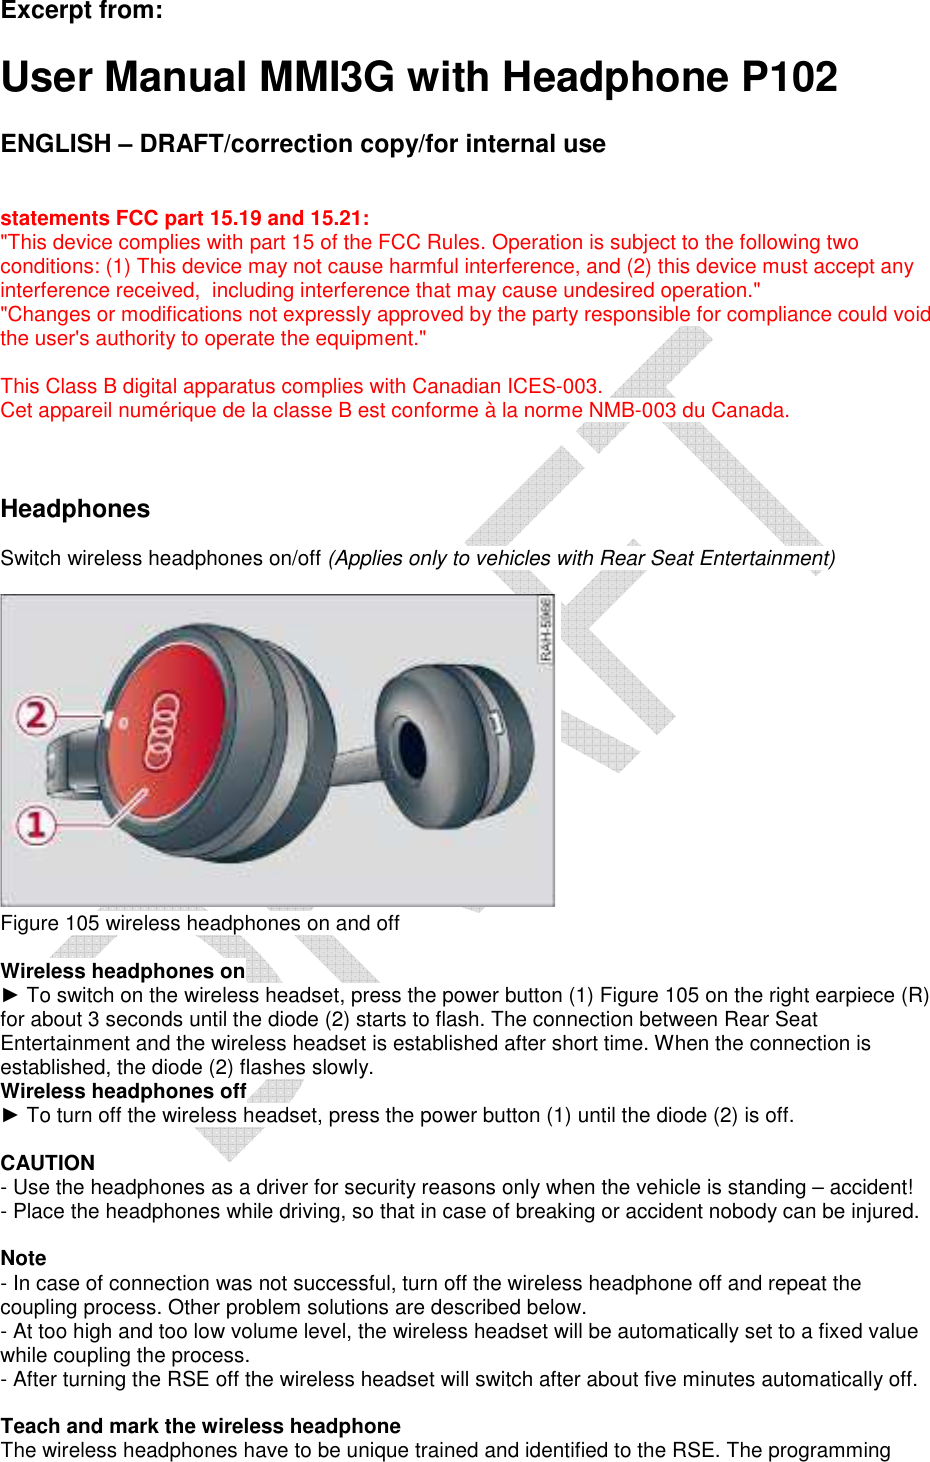   Excerpt from:  User Manual MMI3G with Headphone P102  ENGLISH – DRAFT/correction copy/for internal use   statements FCC part 15.19 and 15.21: &quot;This device complies with part 15 of the FCC Rules. Operation is subject to the following two conditions: (1) This device may not cause harmful interference, and (2) this device must accept any interference received,  including interference that may cause undesired operation.&quot; &quot;Changes or modifications not expressly approved by the party responsible for compliance could void the user&apos;s authority to operate the equipment.&quot;  This Class B digital apparatus complies with Canadian ICES-003. Cet appareil numérique de la classe B est conforme à la norme NMB-003 du Canada.    Headphones   Switch wireless headphones on/off (Applies only to vehicles with Rear Seat Entertainment)      Figure 105 wireless headphones on and off   Wireless headphones on  ► To switch on the wireless headset, press the power button (1) Figure 105 on the right earpiece (R) for about 3 seconds until the diode (2) starts to flash. The connection between Rear Seat Entertainment and the wireless headset is established after short time. When the connection is established, the diode (2) flashes slowly.  Wireless headphones off  ► To turn off the wireless headset, press the power button (1) until the diode (2) is off.   CAUTION  - Use the headphones as a driver for security reasons only when the vehicle is standing – accident!  - Place the headphones while driving, so that in case of breaking or accident nobody can be injured.   Note  - In case of connection was not successful, turn off the wireless headphone off and repeat the coupling process. Other problem solutions are described below.  - At too high and too low volume level, the wireless headset will be automatically set to a fixed value while coupling the process.  - After turning the RSE off the wireless headset will switch after about five minutes automatically off.   Teach and mark the wireless headphone  The wireless headphones have to be unique trained and identified to the RSE. The programming 